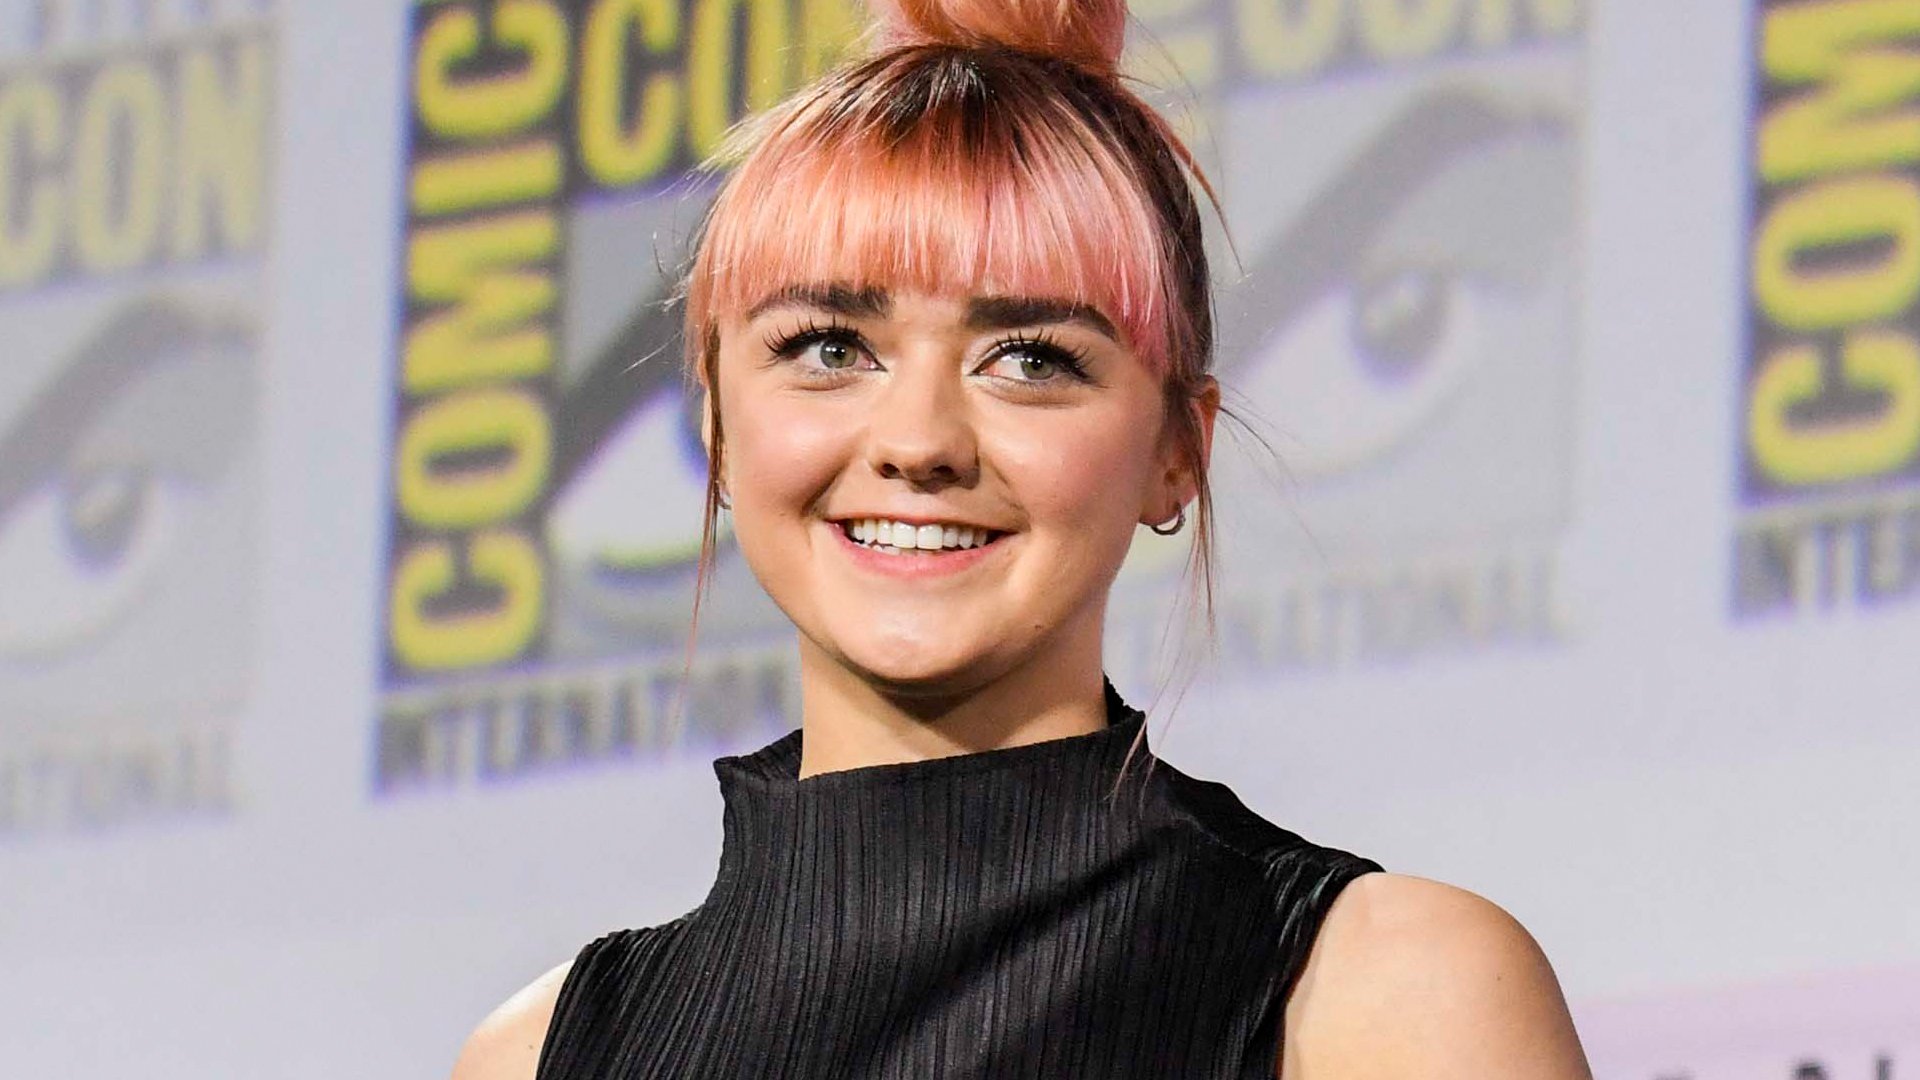 Maisie Williams at “Game Of Thrones” Comic Con Autograph Signing 2019 on July 19, 2019 in San Diego, California.